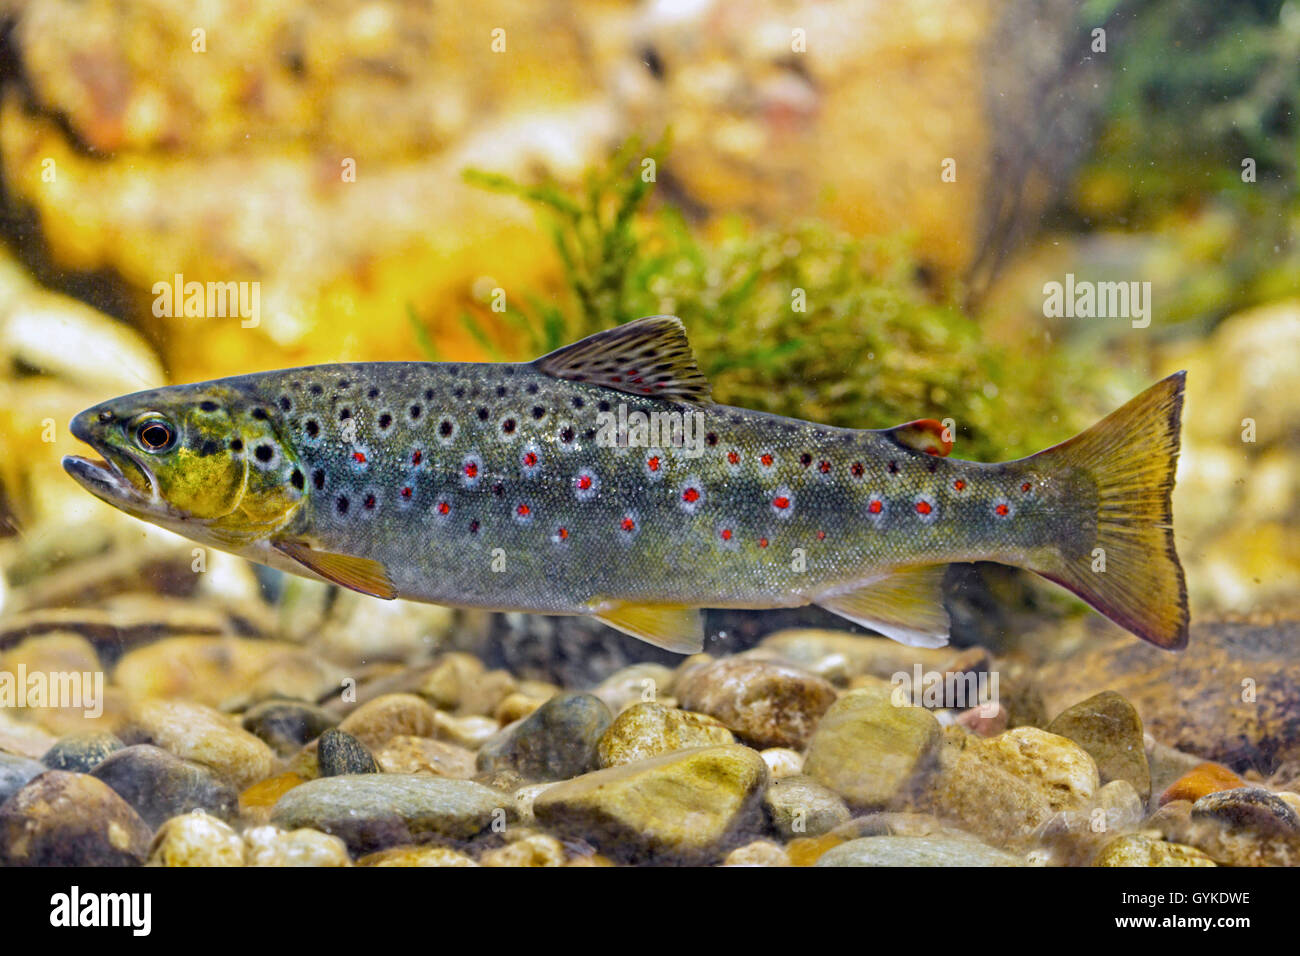 brown trout, river trout, brook trout (Salmo trutta fario), indigenous form from the Isen, Germany, Bavaria, Isental Stock Photo